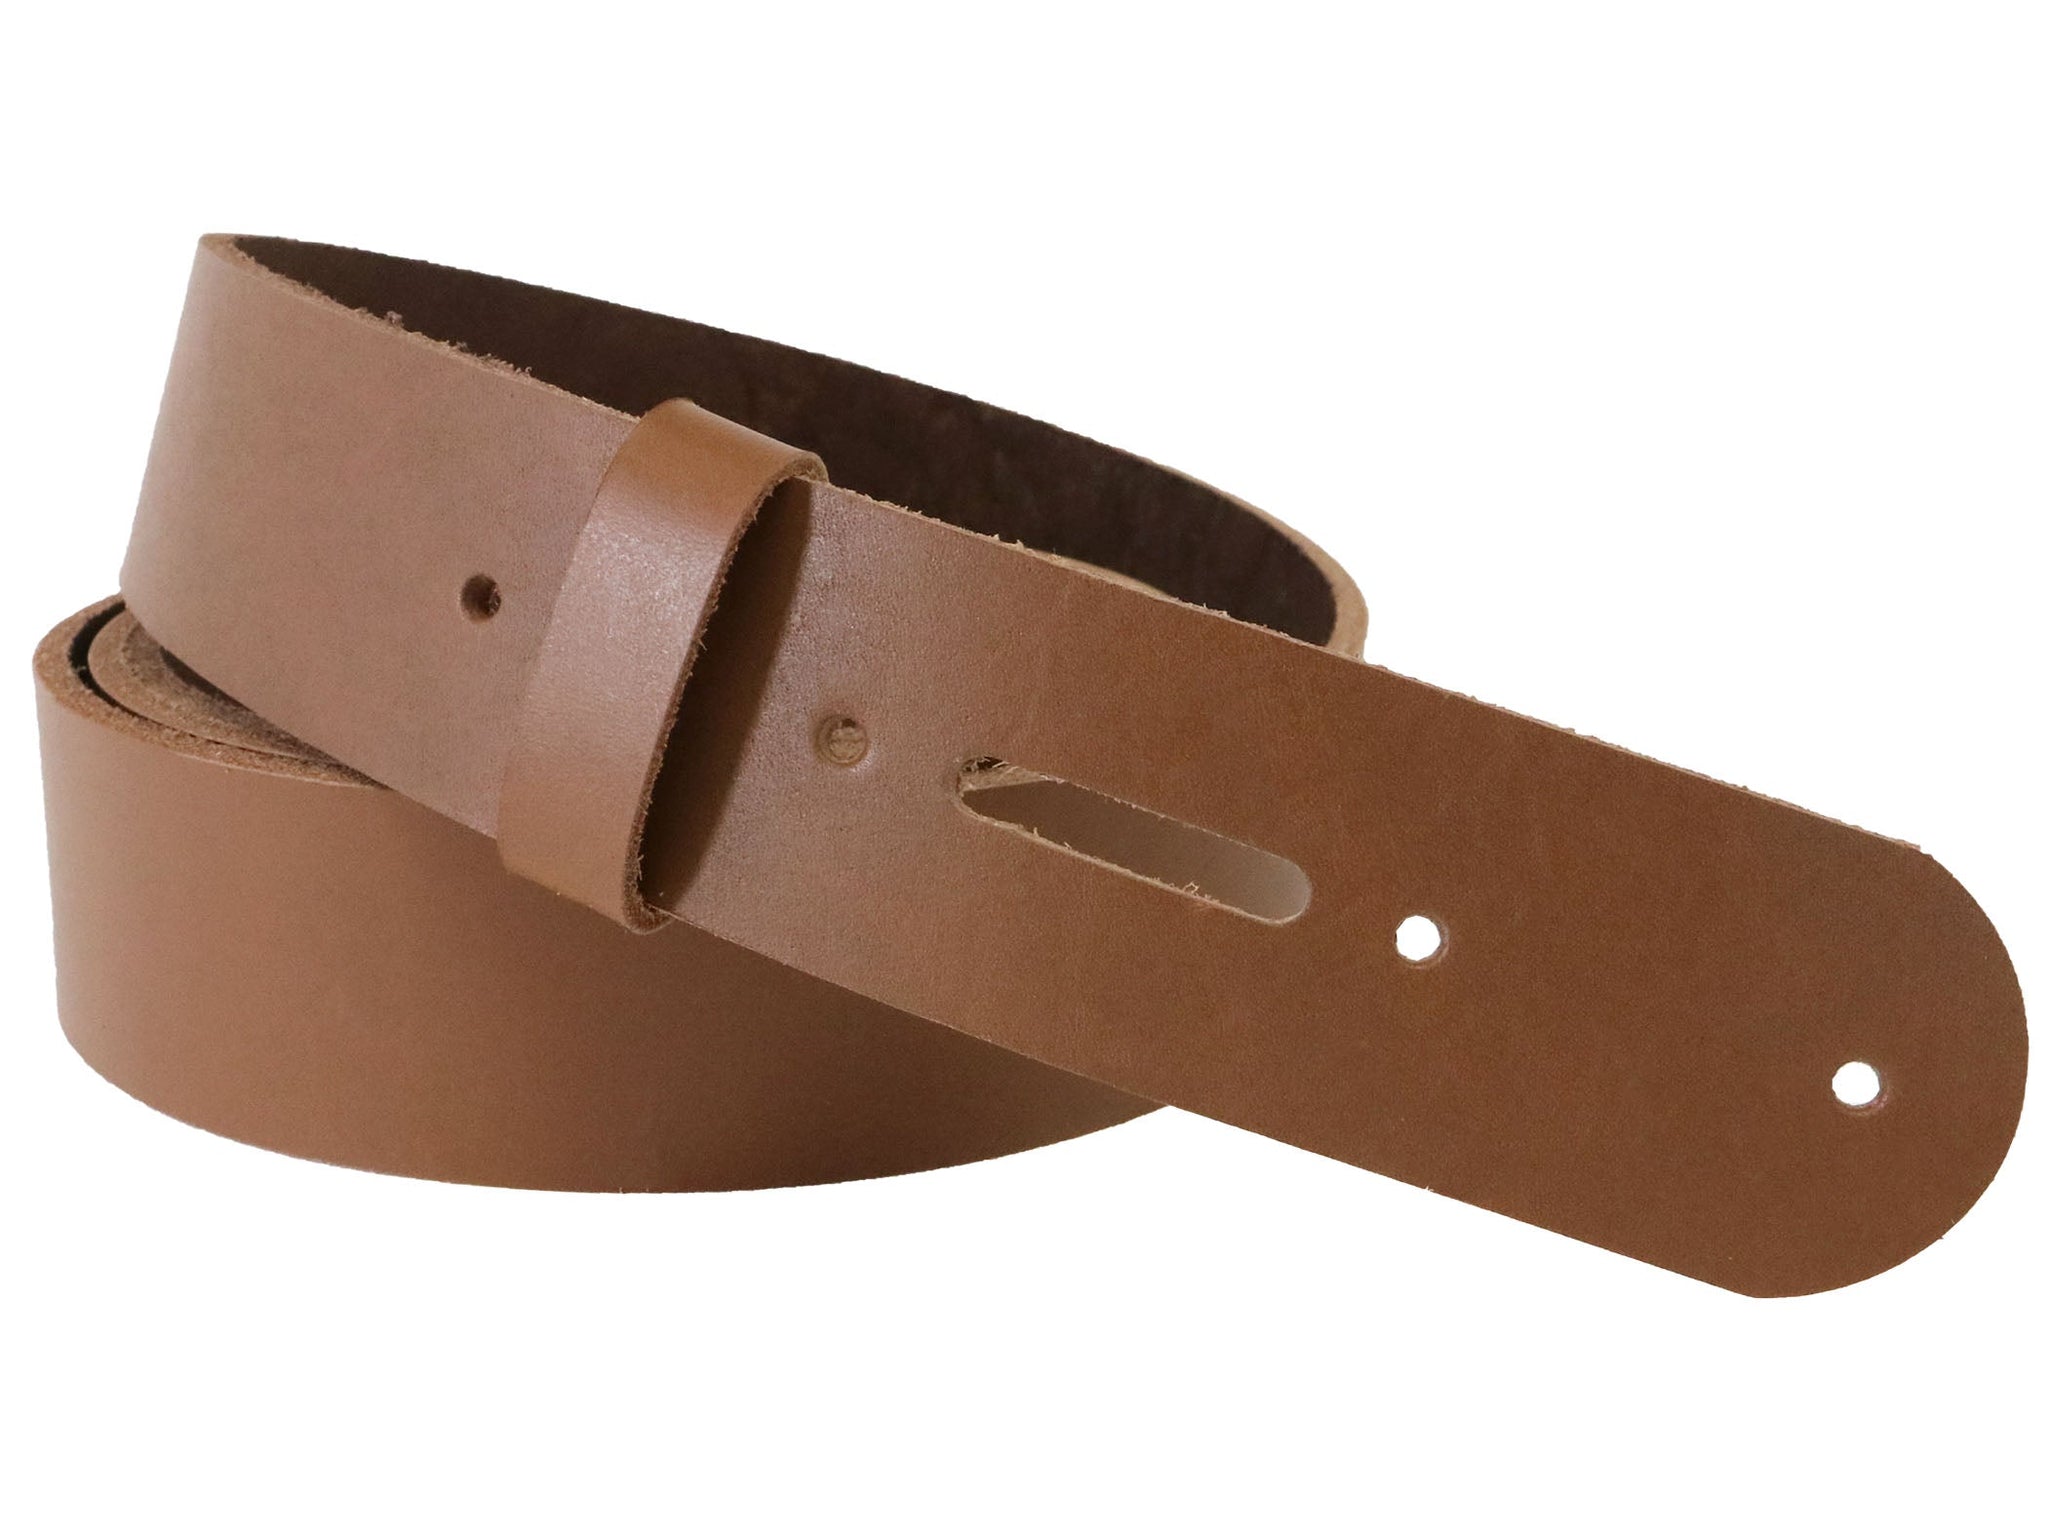 Stonestreet Leather Brown Vegetable Tanned Leather Belt Blank w/ Matching Keeper | 60 inch-70 inch Length, Women's, Size: 6/7oz (2.4-2.8mm)